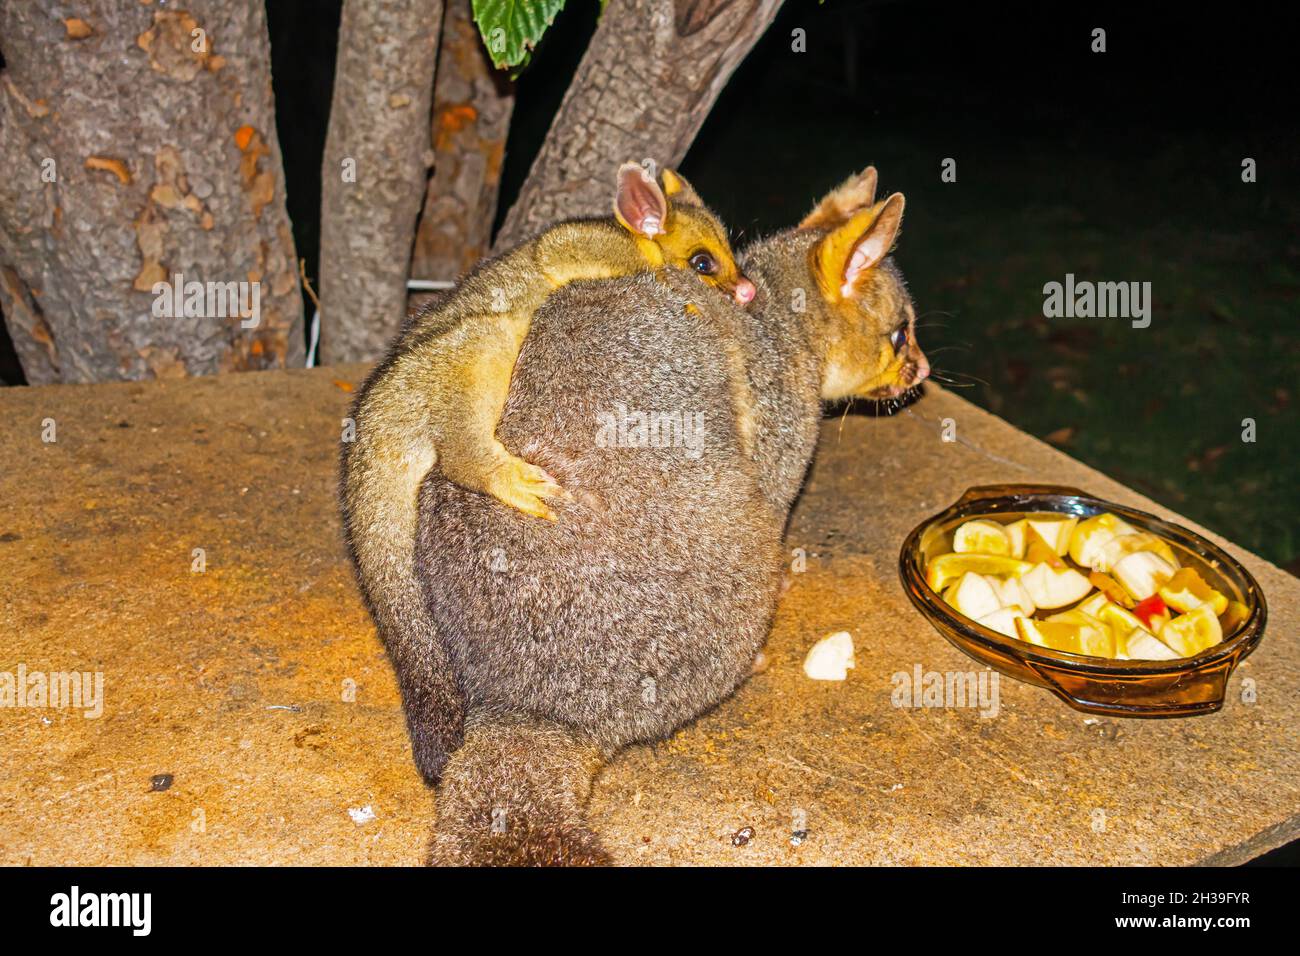 aby possum on mothers back, Trichosurus vulpecula. Stock Photo